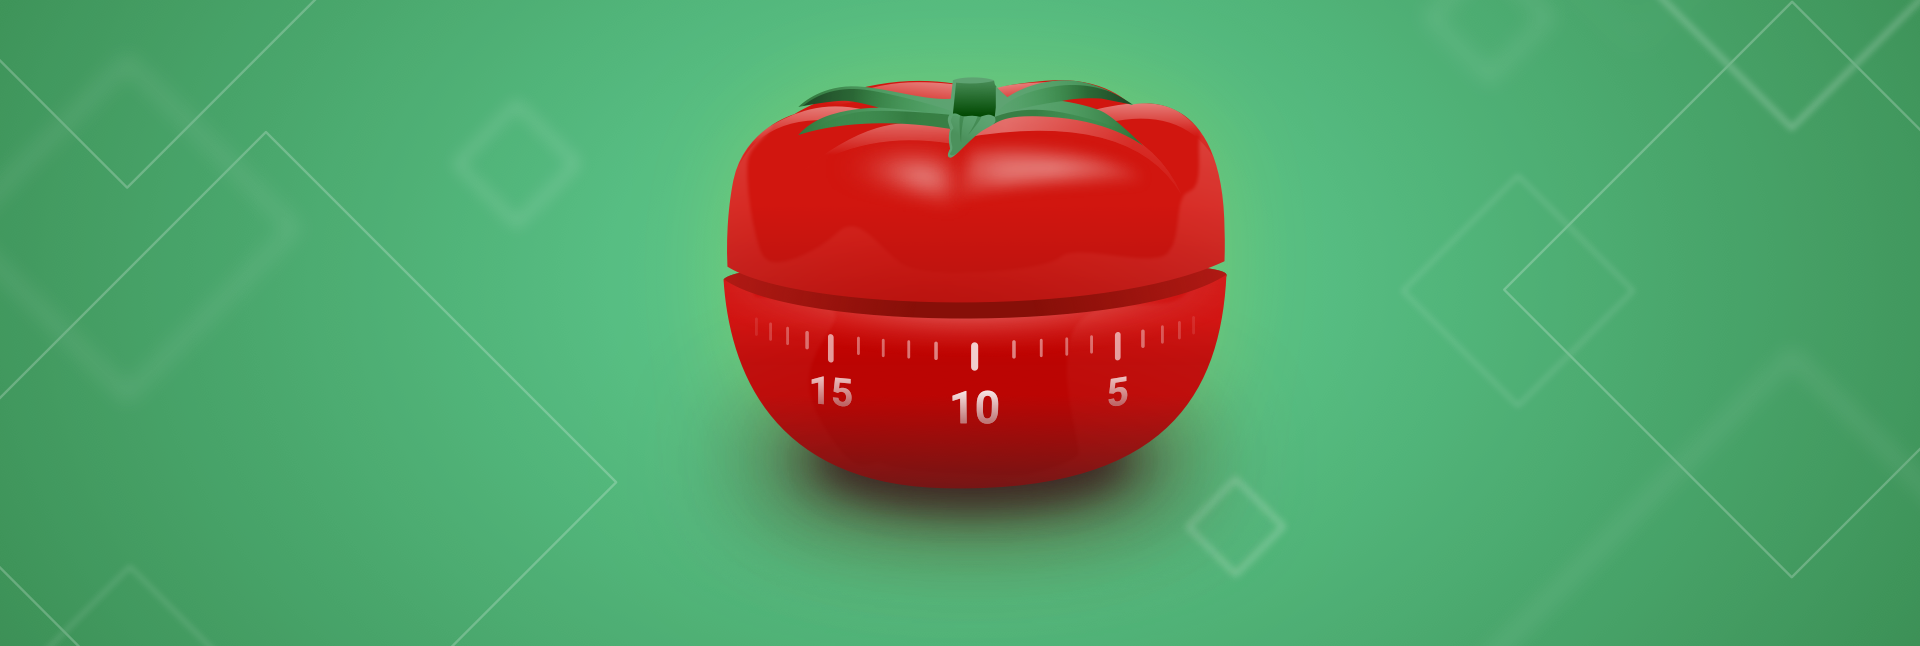 tomato timer study rules